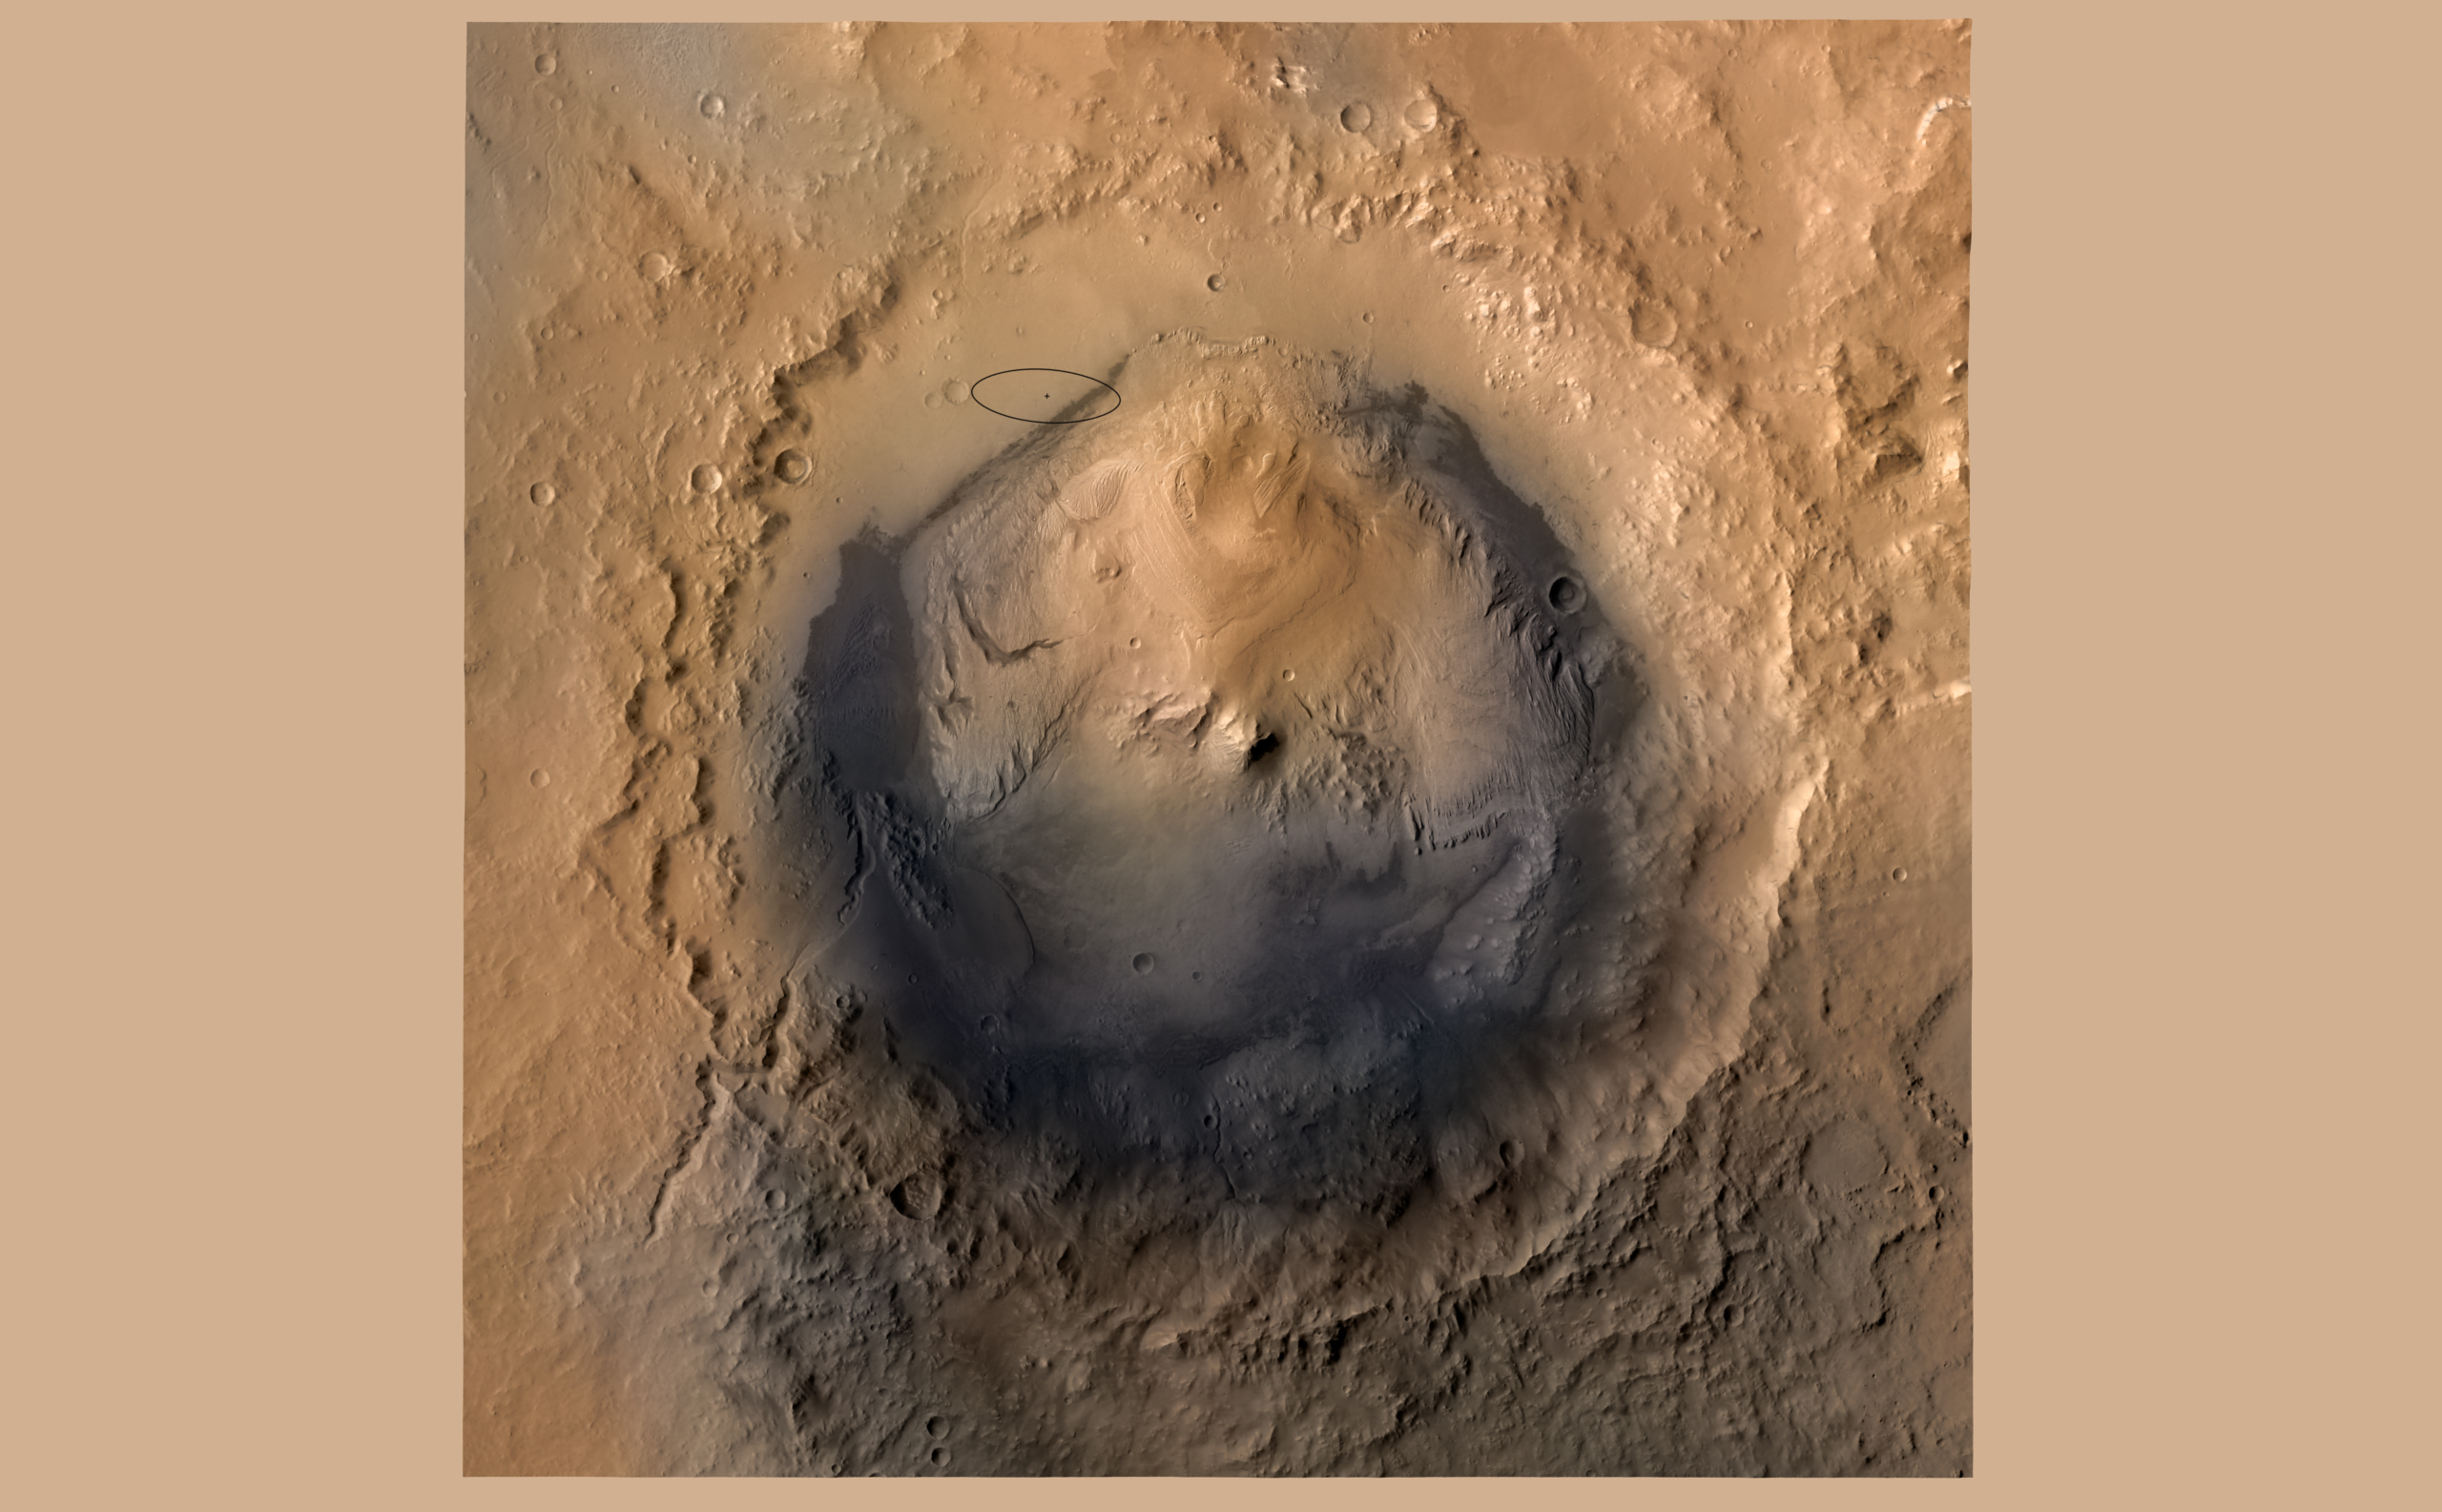 As of June 2012, the target landing area for NASA's Mars Science Laboratory mission is the ellipse marked on this image of Gale Crater.